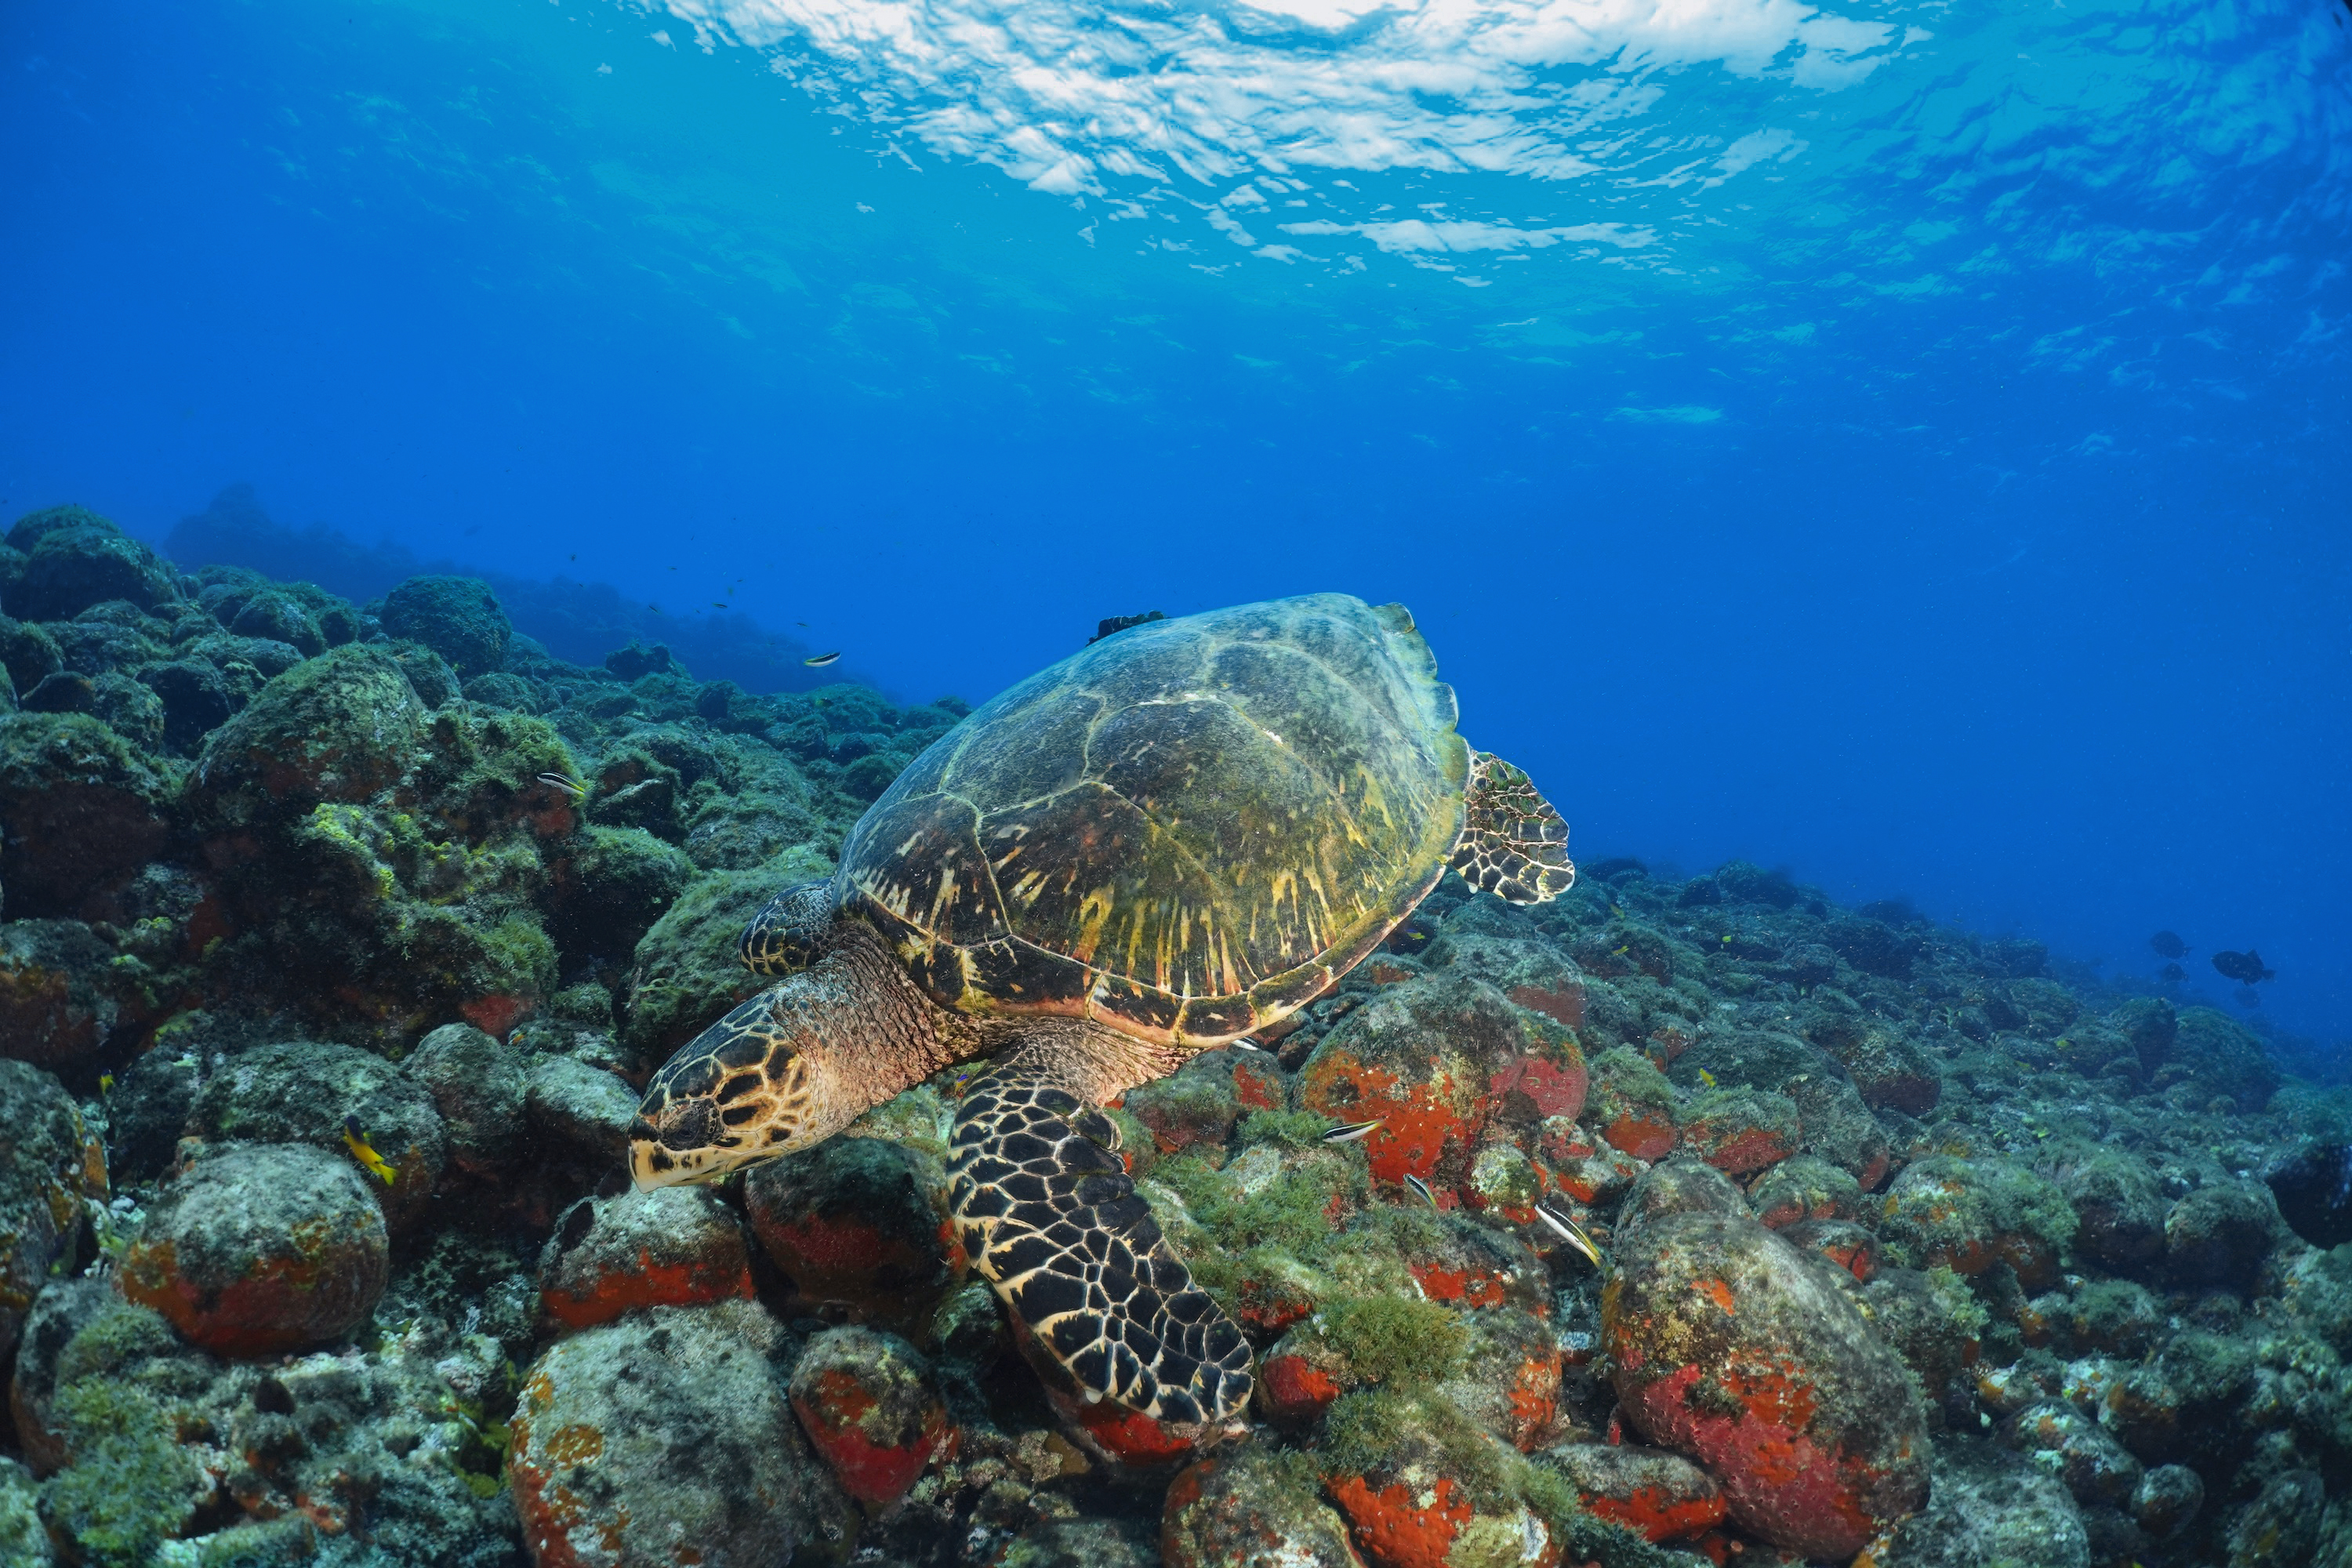 Hawksbill sea turtle grazing at Cabritos a Canal. Photo by Pierre Constant